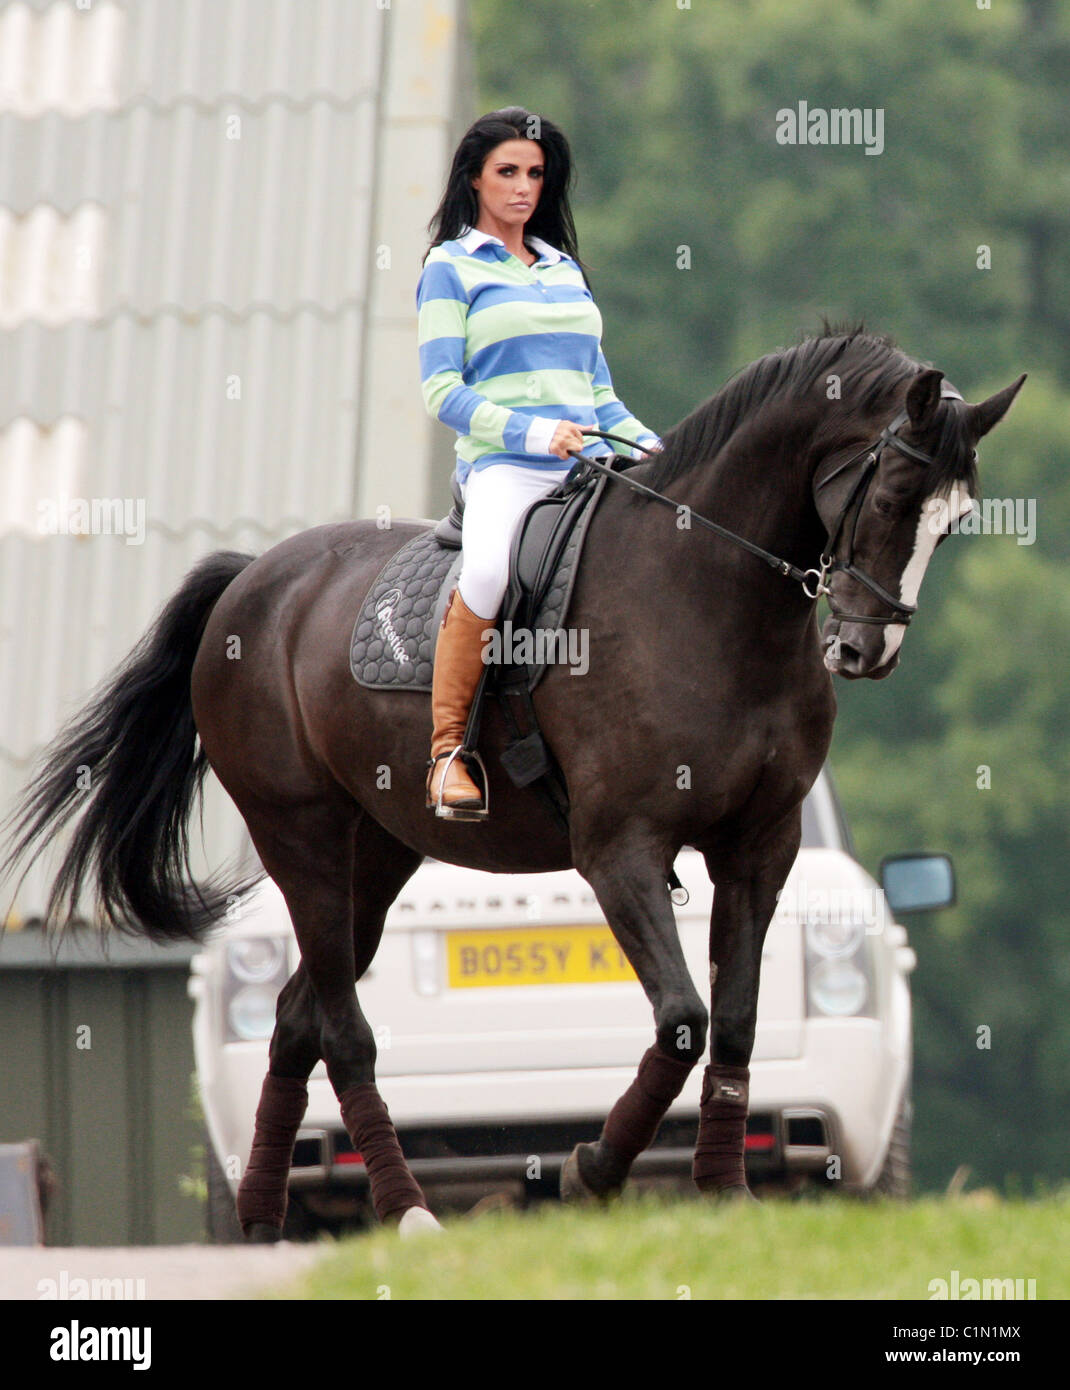 Katie Price aka Jordan riding her horse at the stables East Sussex, England  - 26.06.09 .com Stock Photo - Alamy